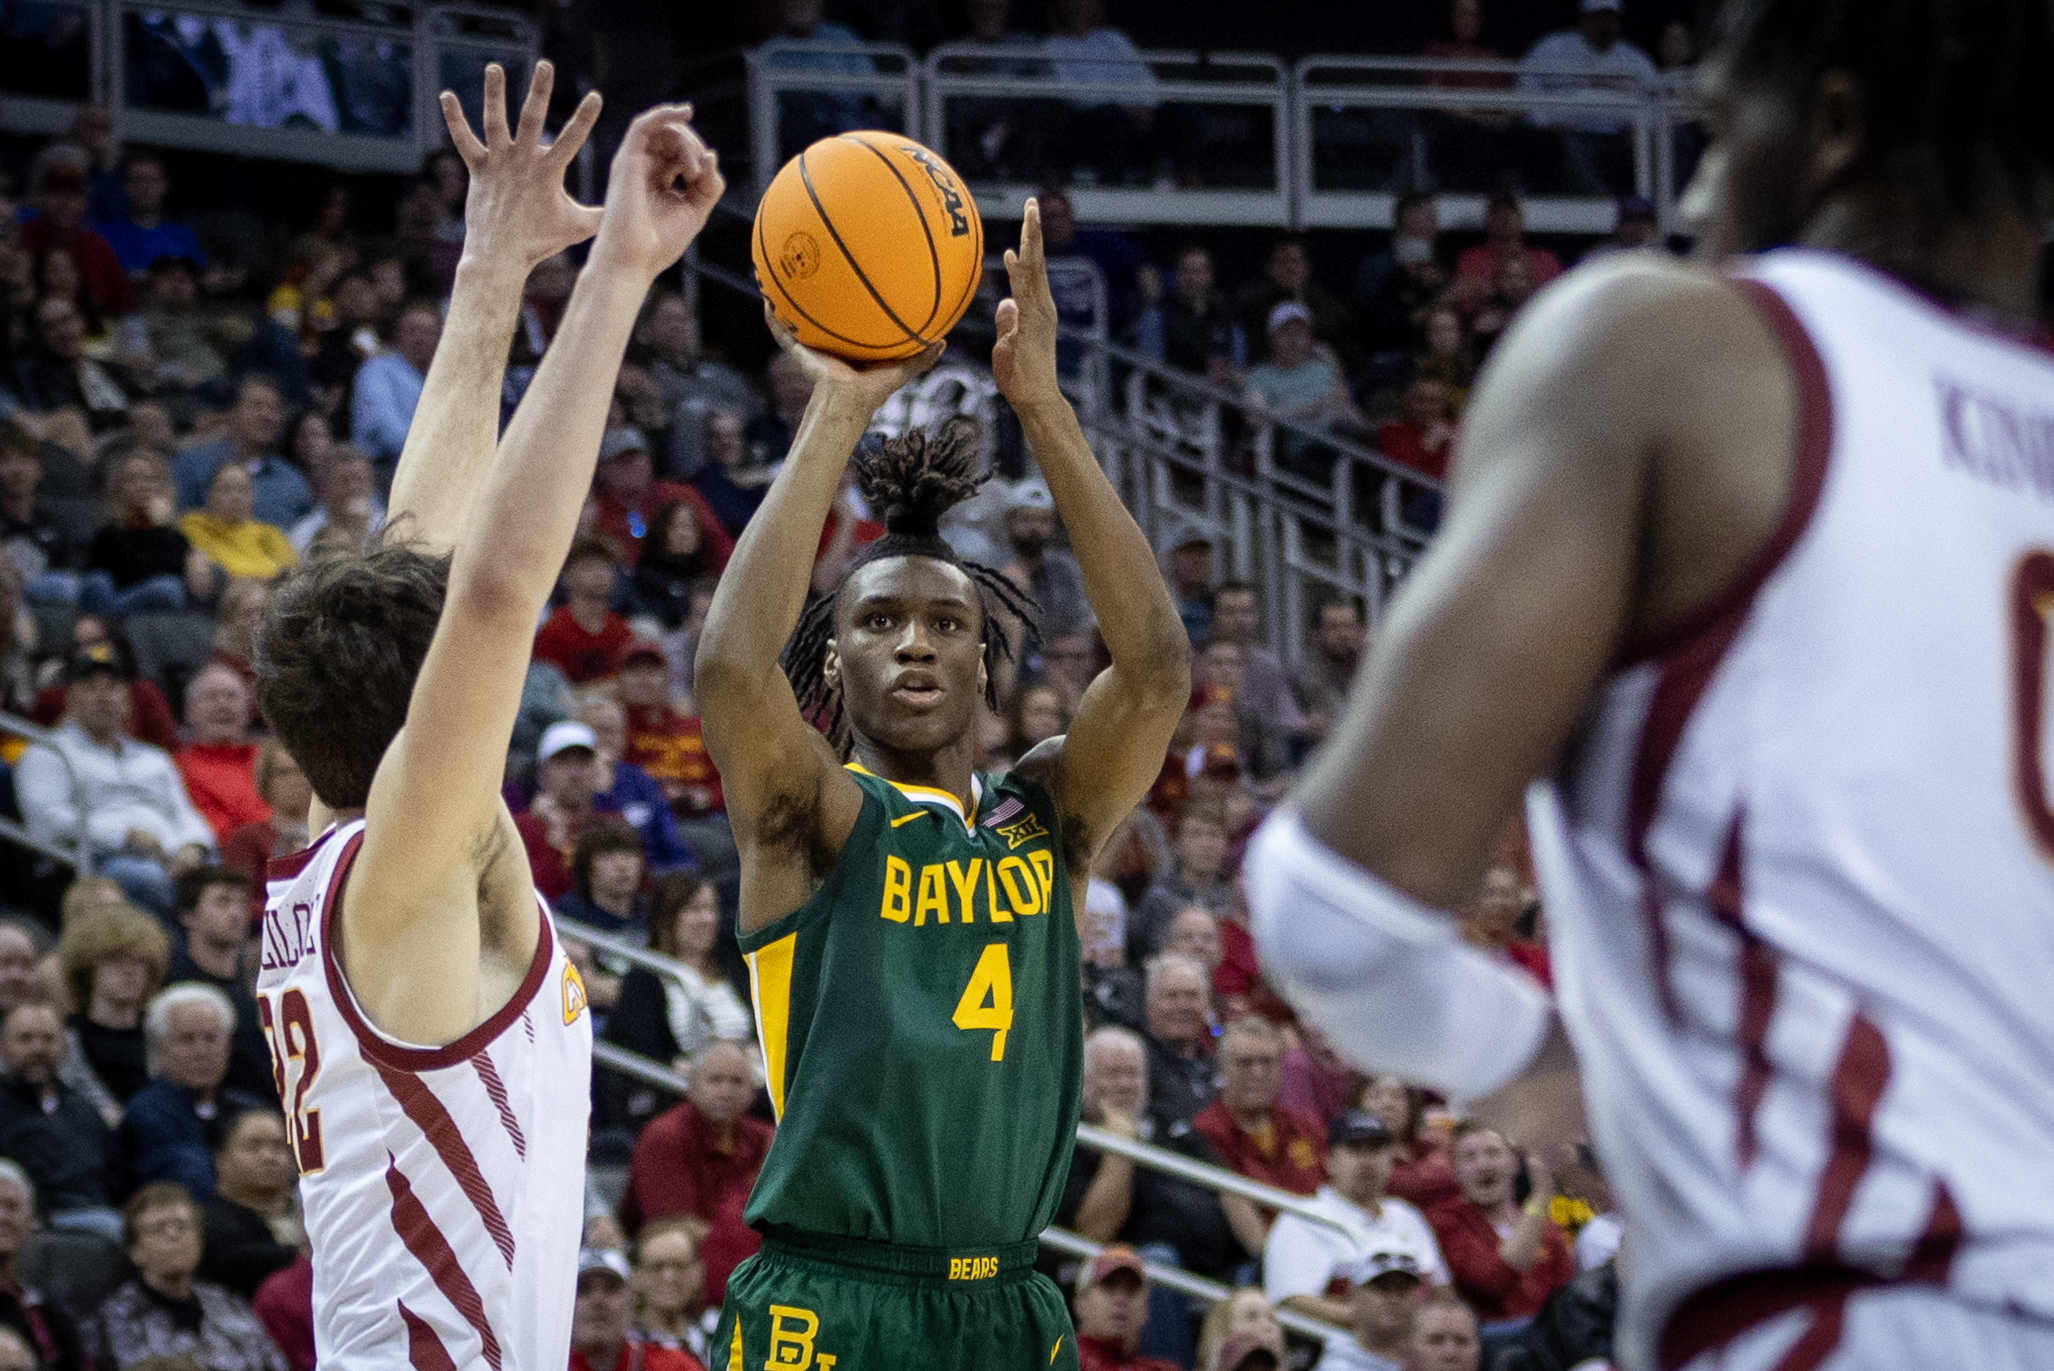 Baylor guard Ja'Kobe Walter (4) shoots the ball during the second half against the Iowa State Cyclones at T-Mobile Center on Friday.